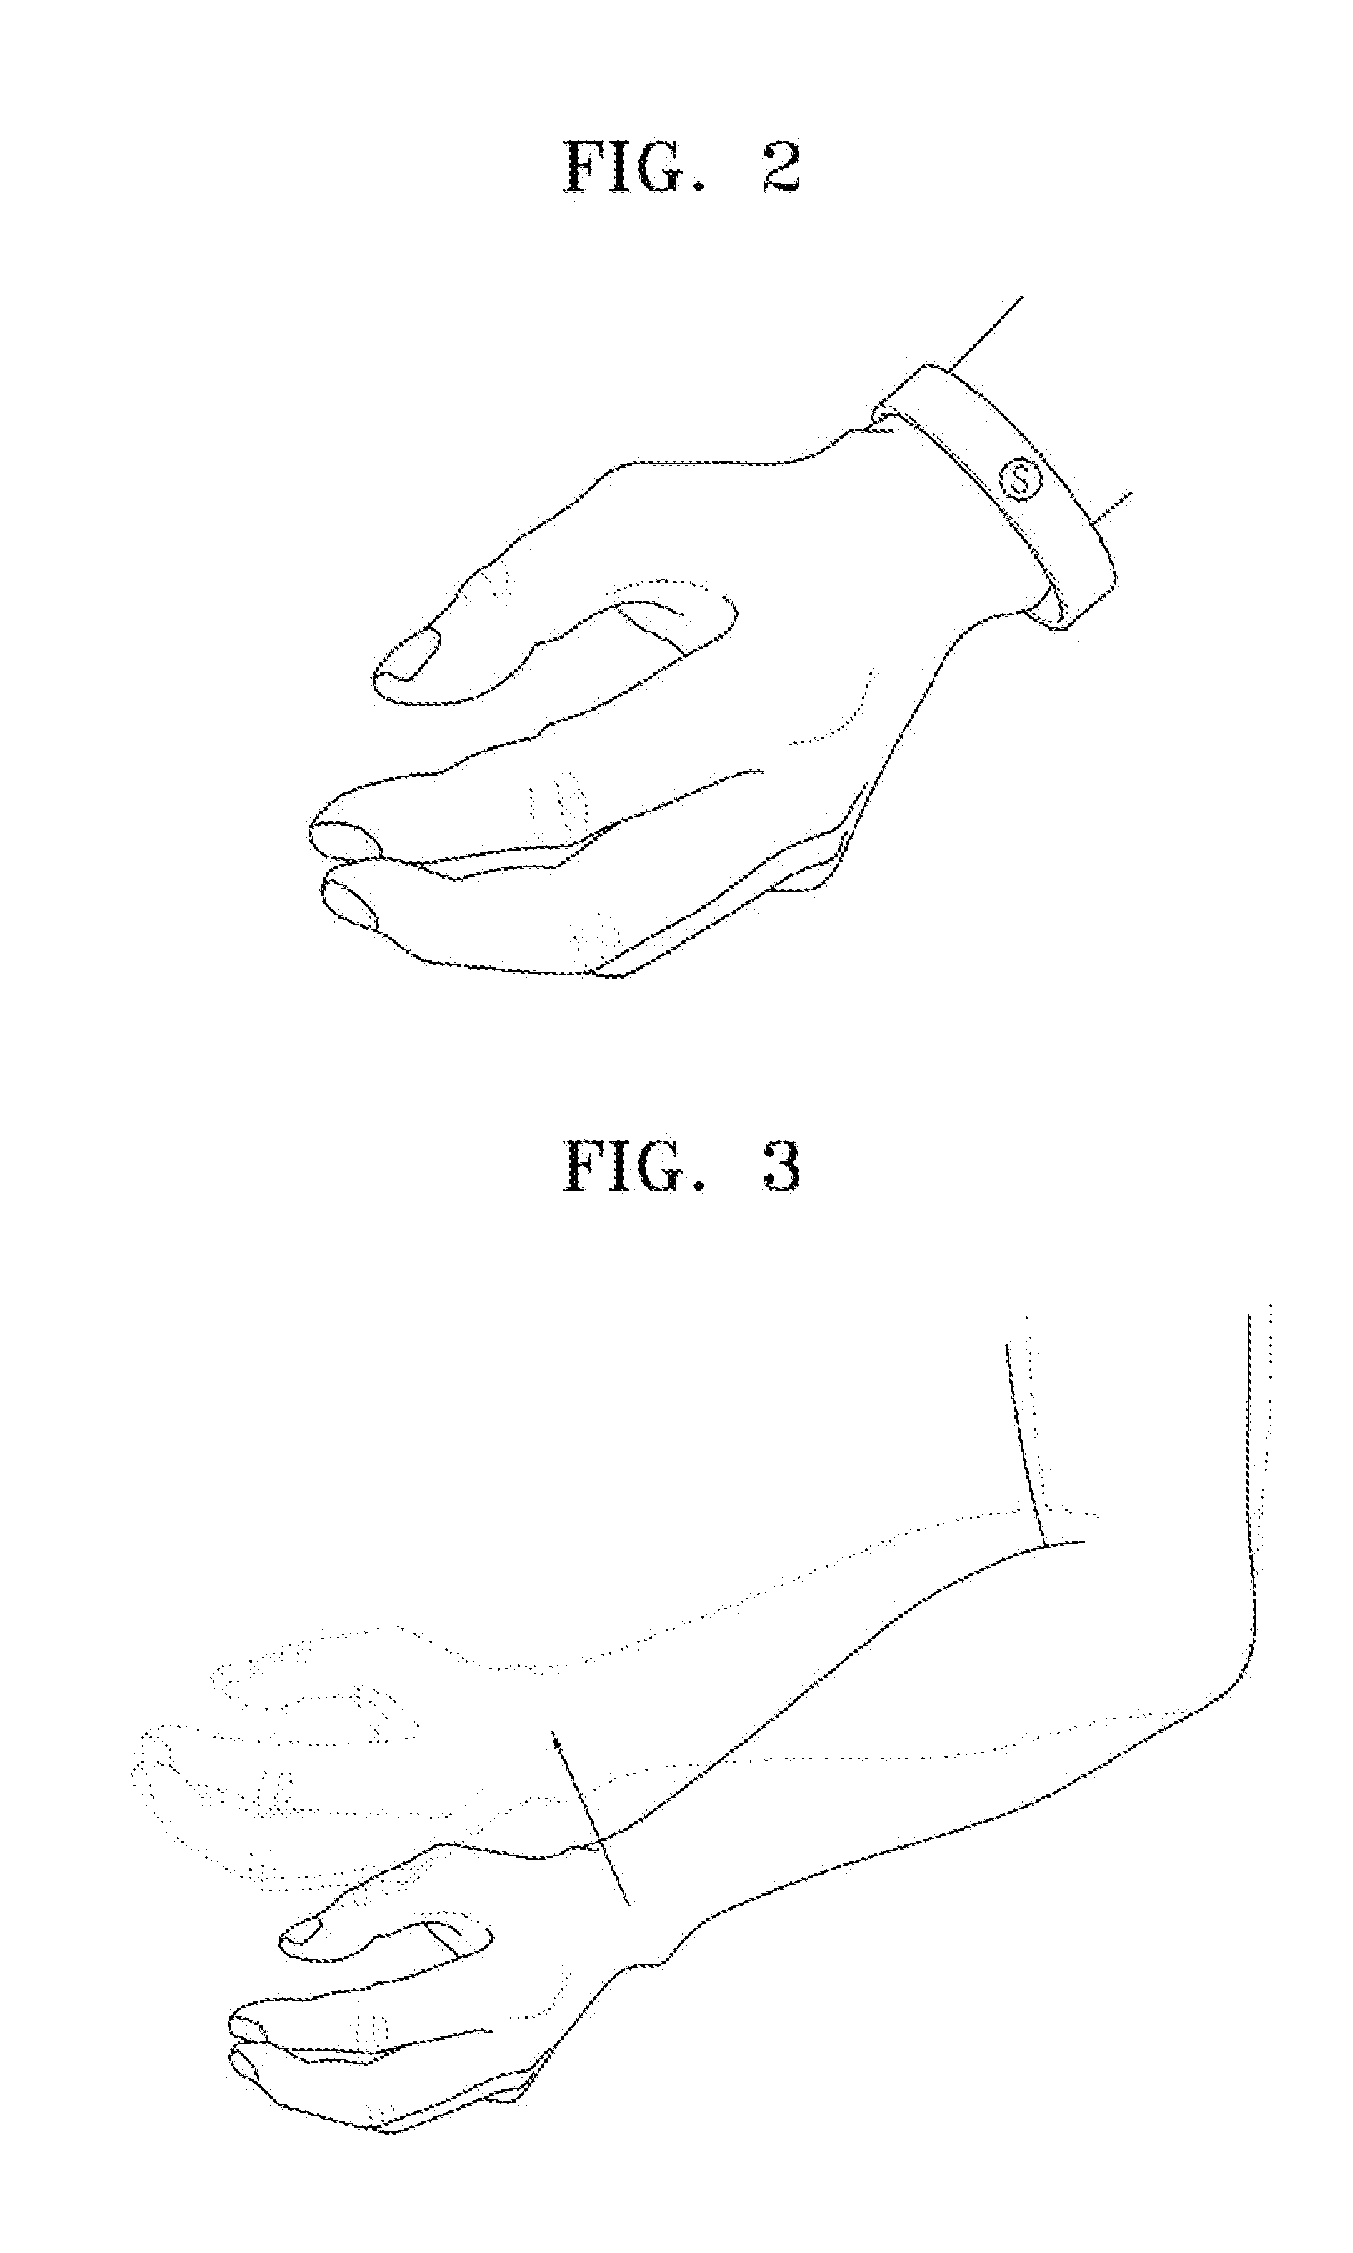 Apparatus for early detection of paralysis based on motion sensing